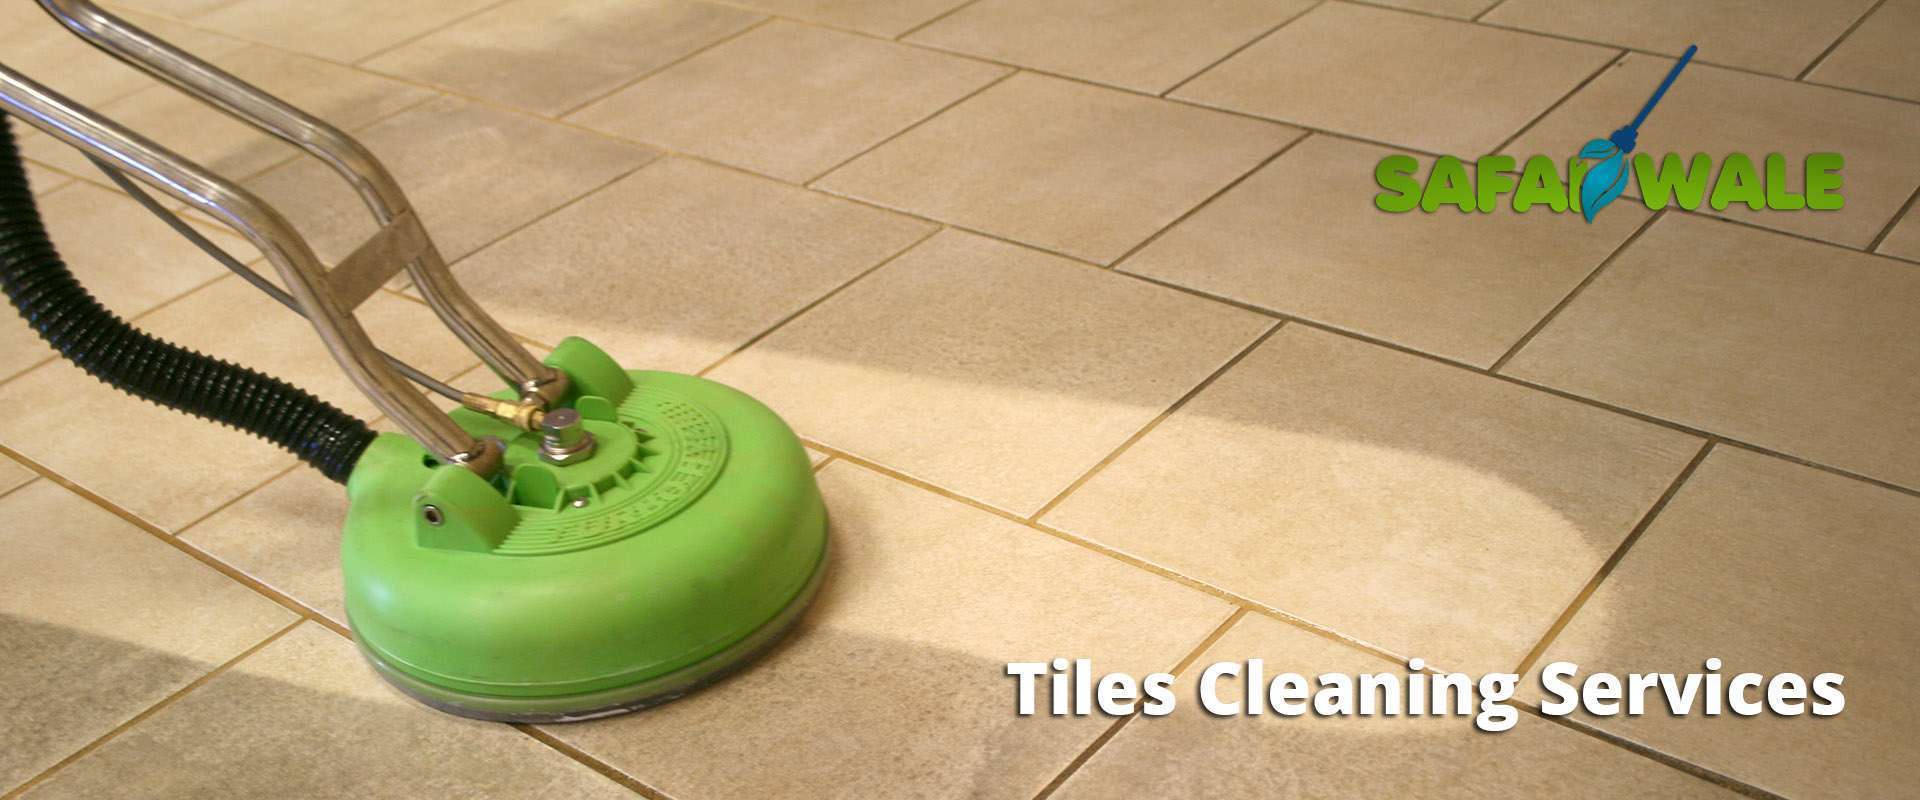 Tiles Cleaning Services In Jaipur